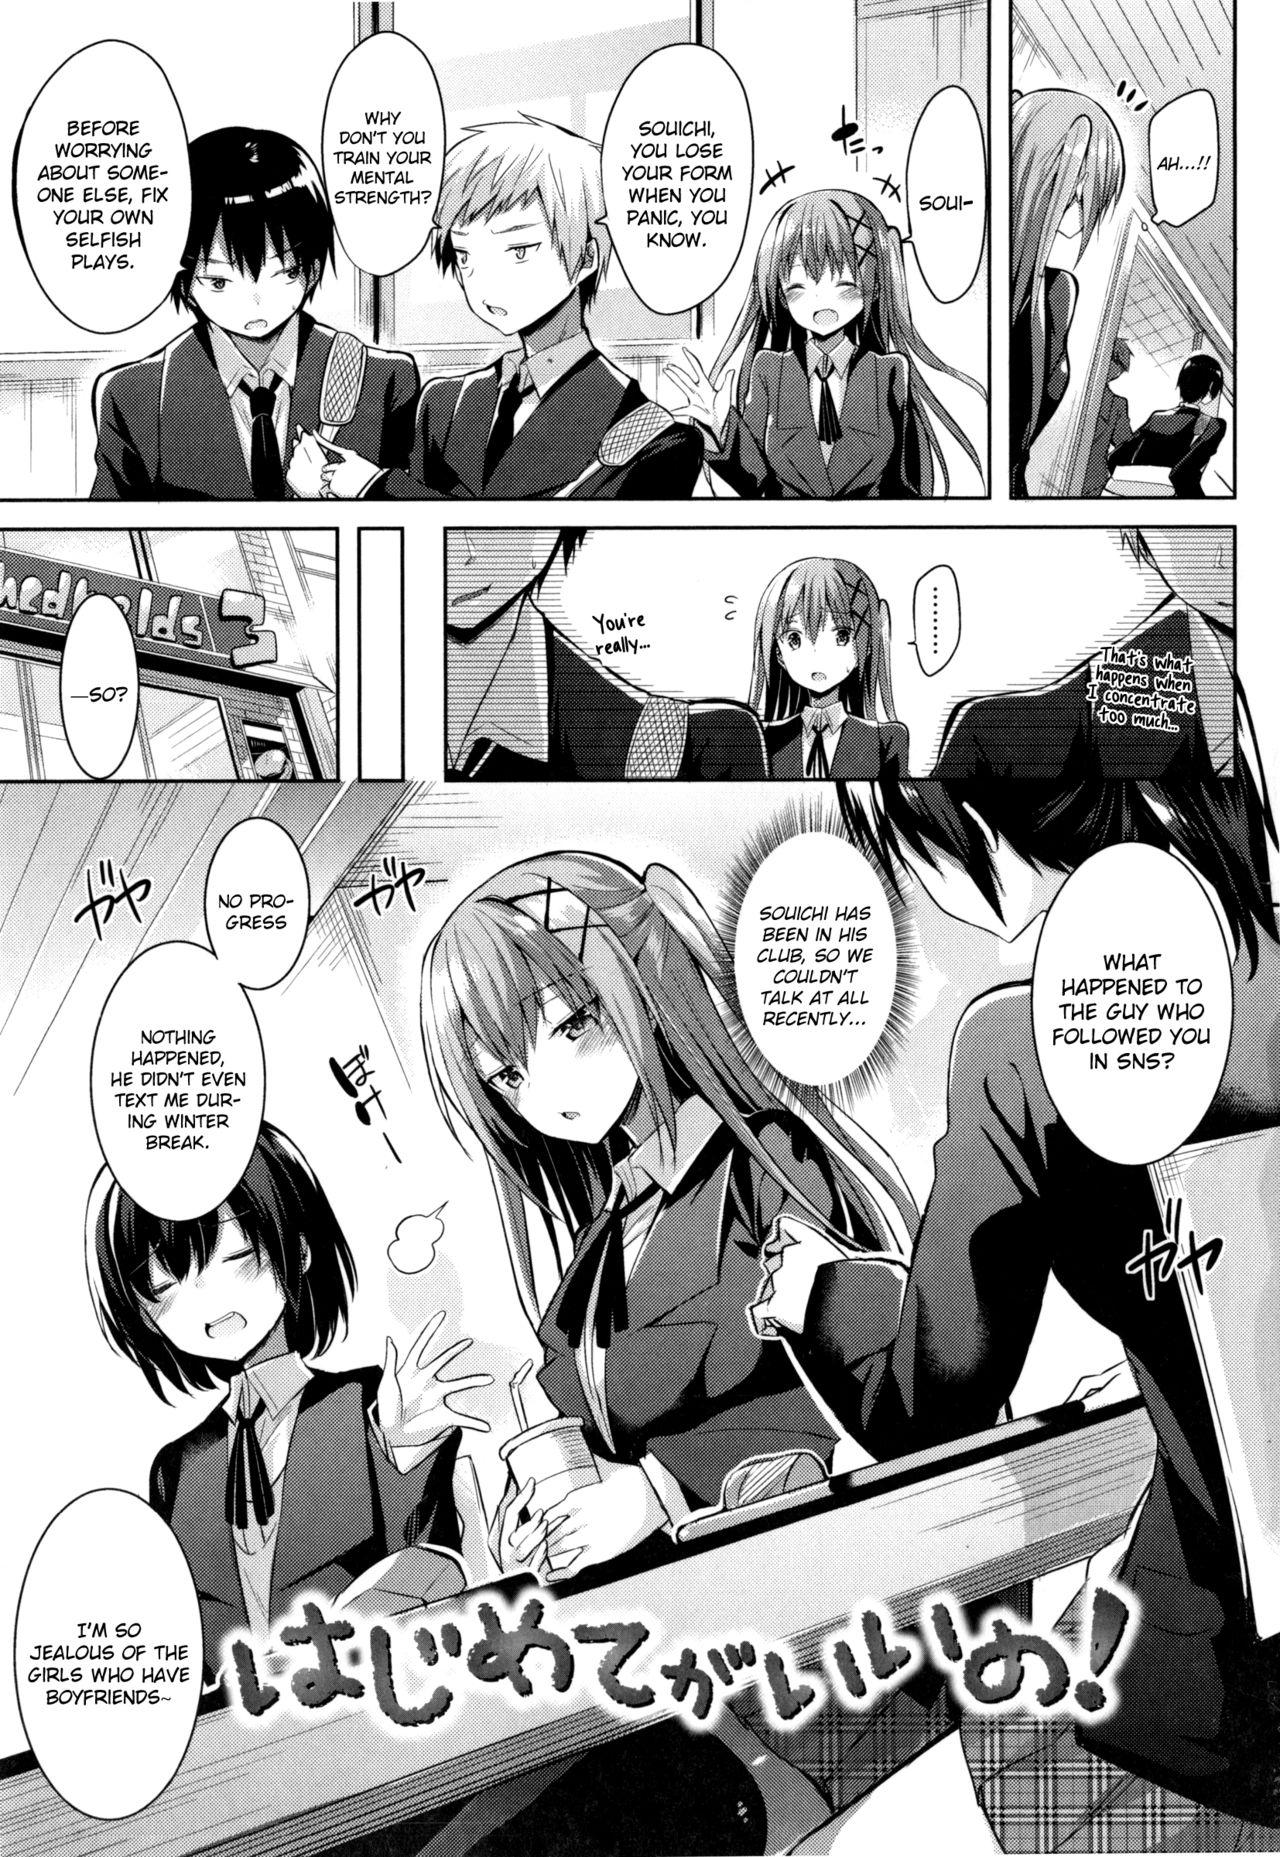 Office Fuck Hajimete ga Ii no! | I Want to be Your First! Outdoor - Page 1